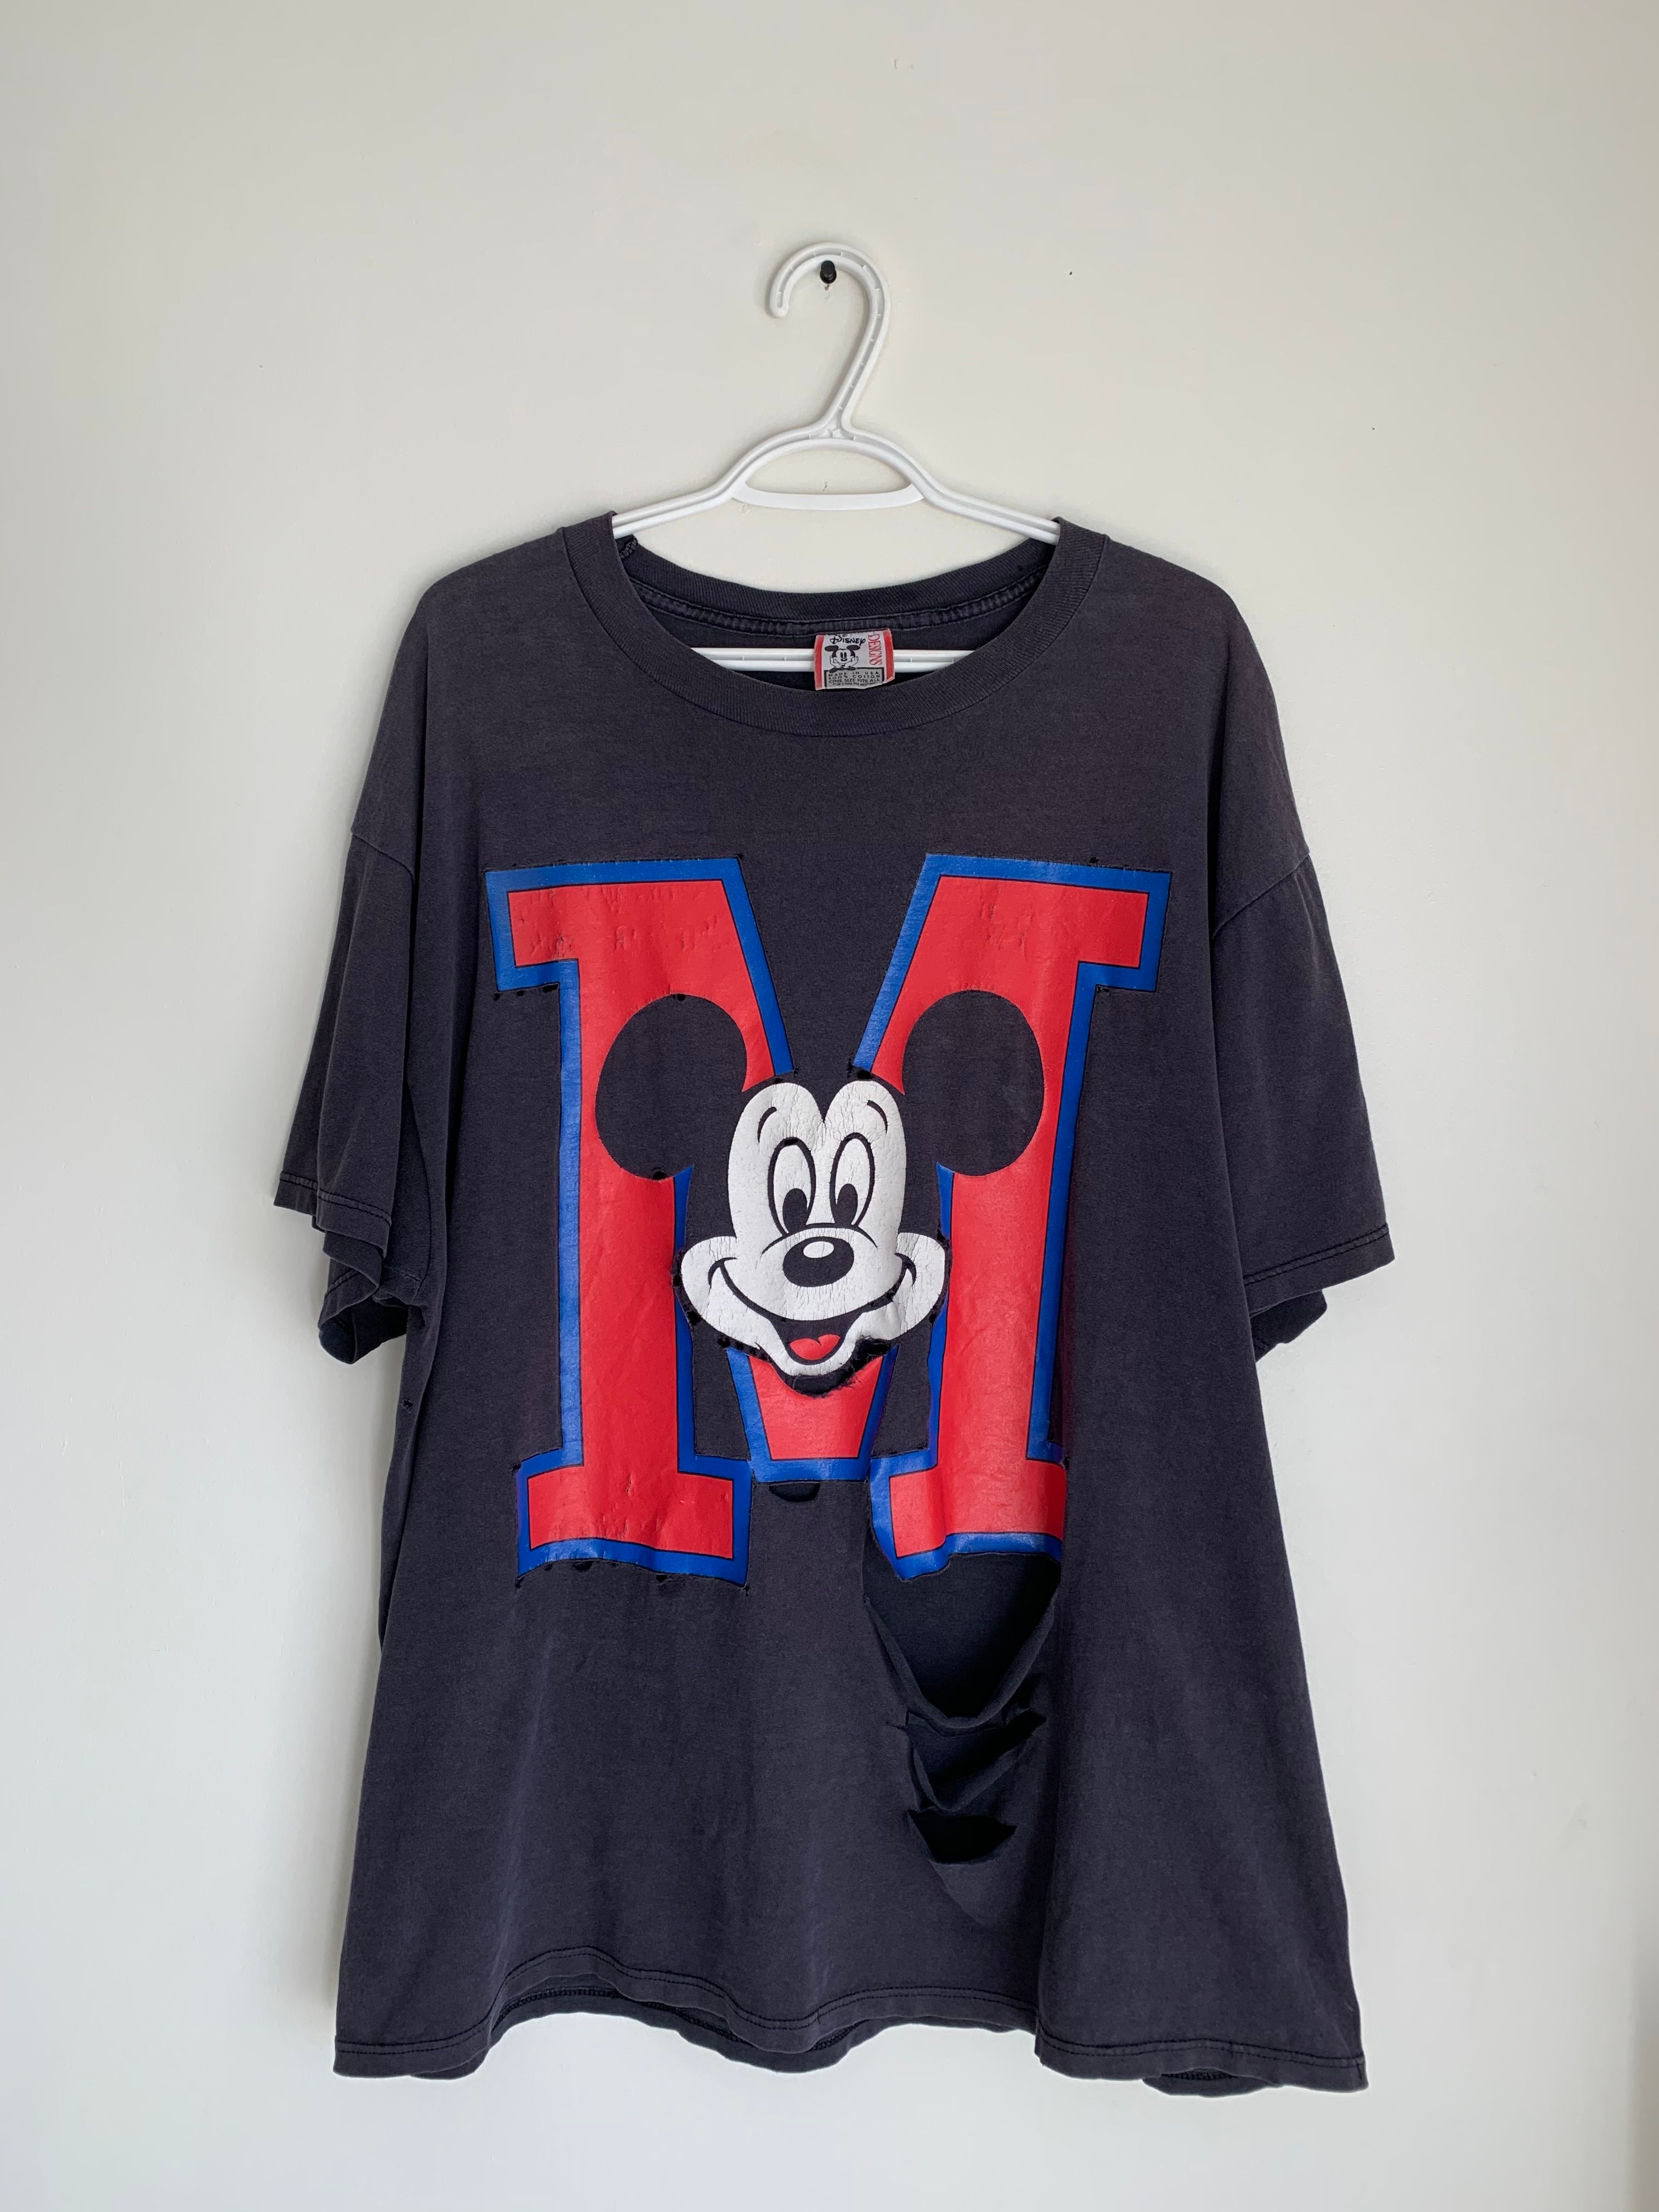 Pre-owned Disney X Mickey Mouse 90's Vtg Distressed Mickey Mouse Disney T-shirt In Black